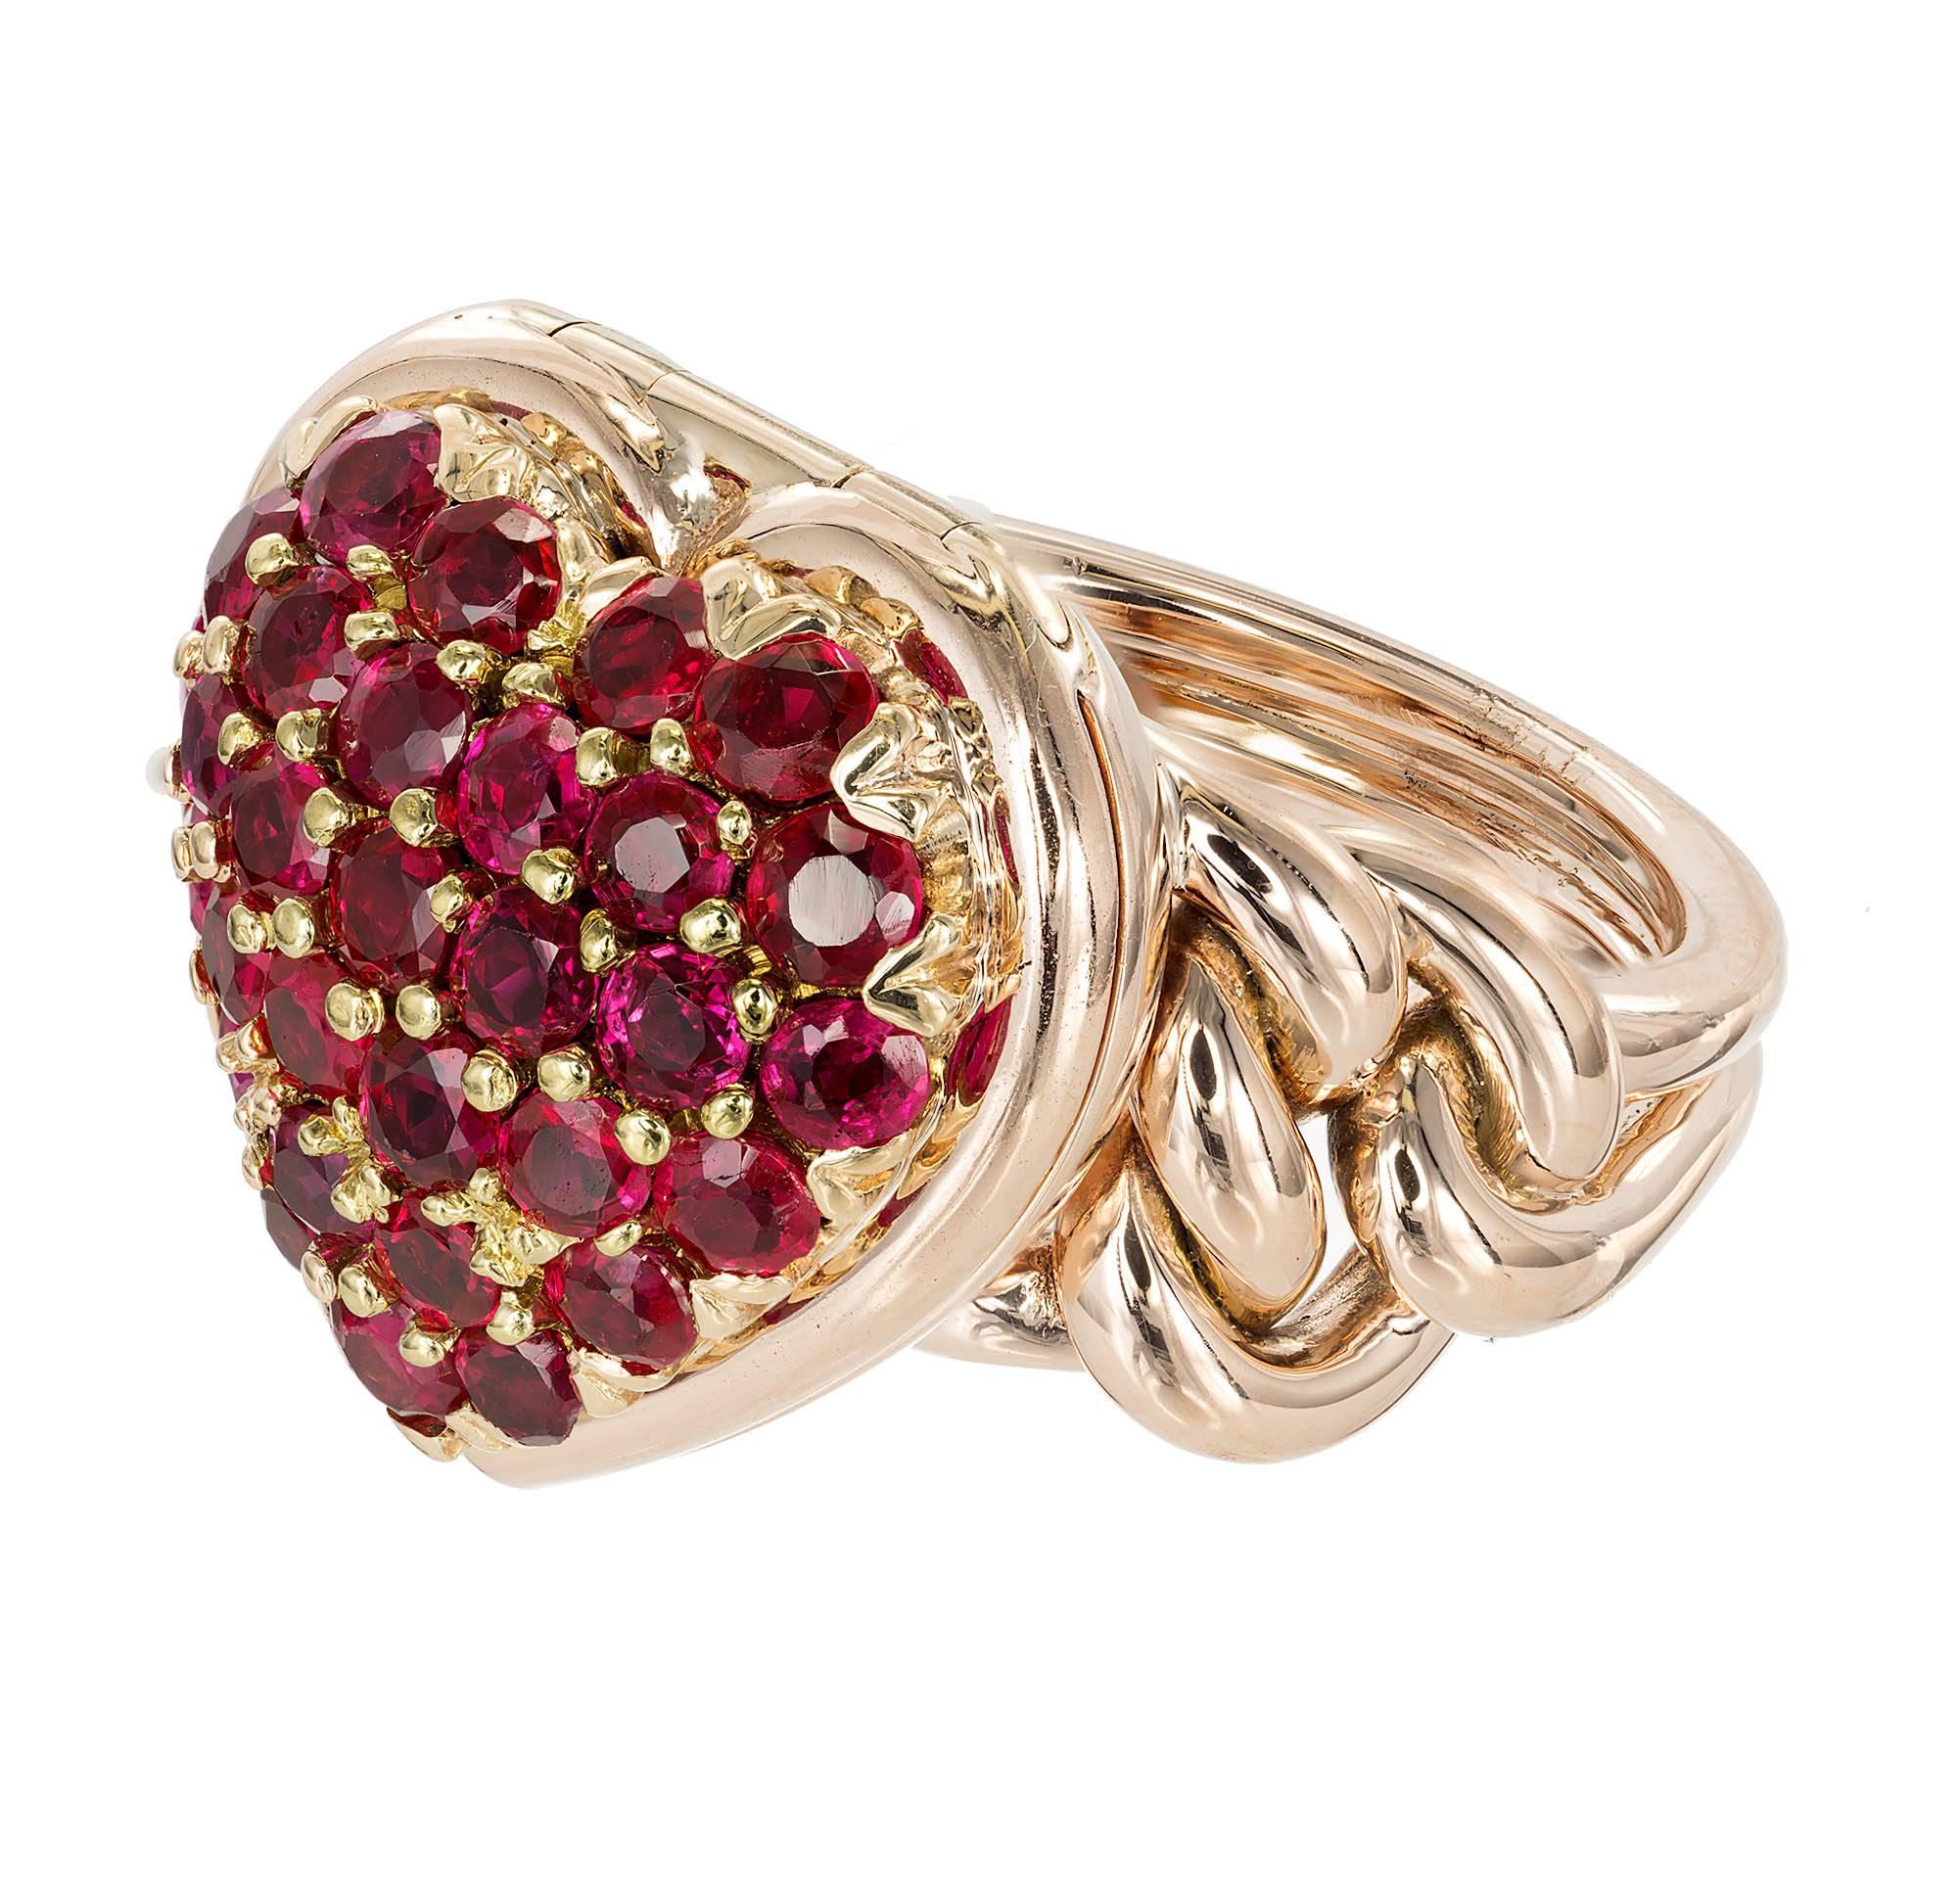 Tiffany & Co heart shape fine Ruby locket 14k rose gold cocktail ring. The top opens to hold a picture. Original frame still inside. 1940s all original rose gold.

30 round pinkish red Rubies, approx. total weight 2.50cts, 2.42mm 
Size 5 and sizable